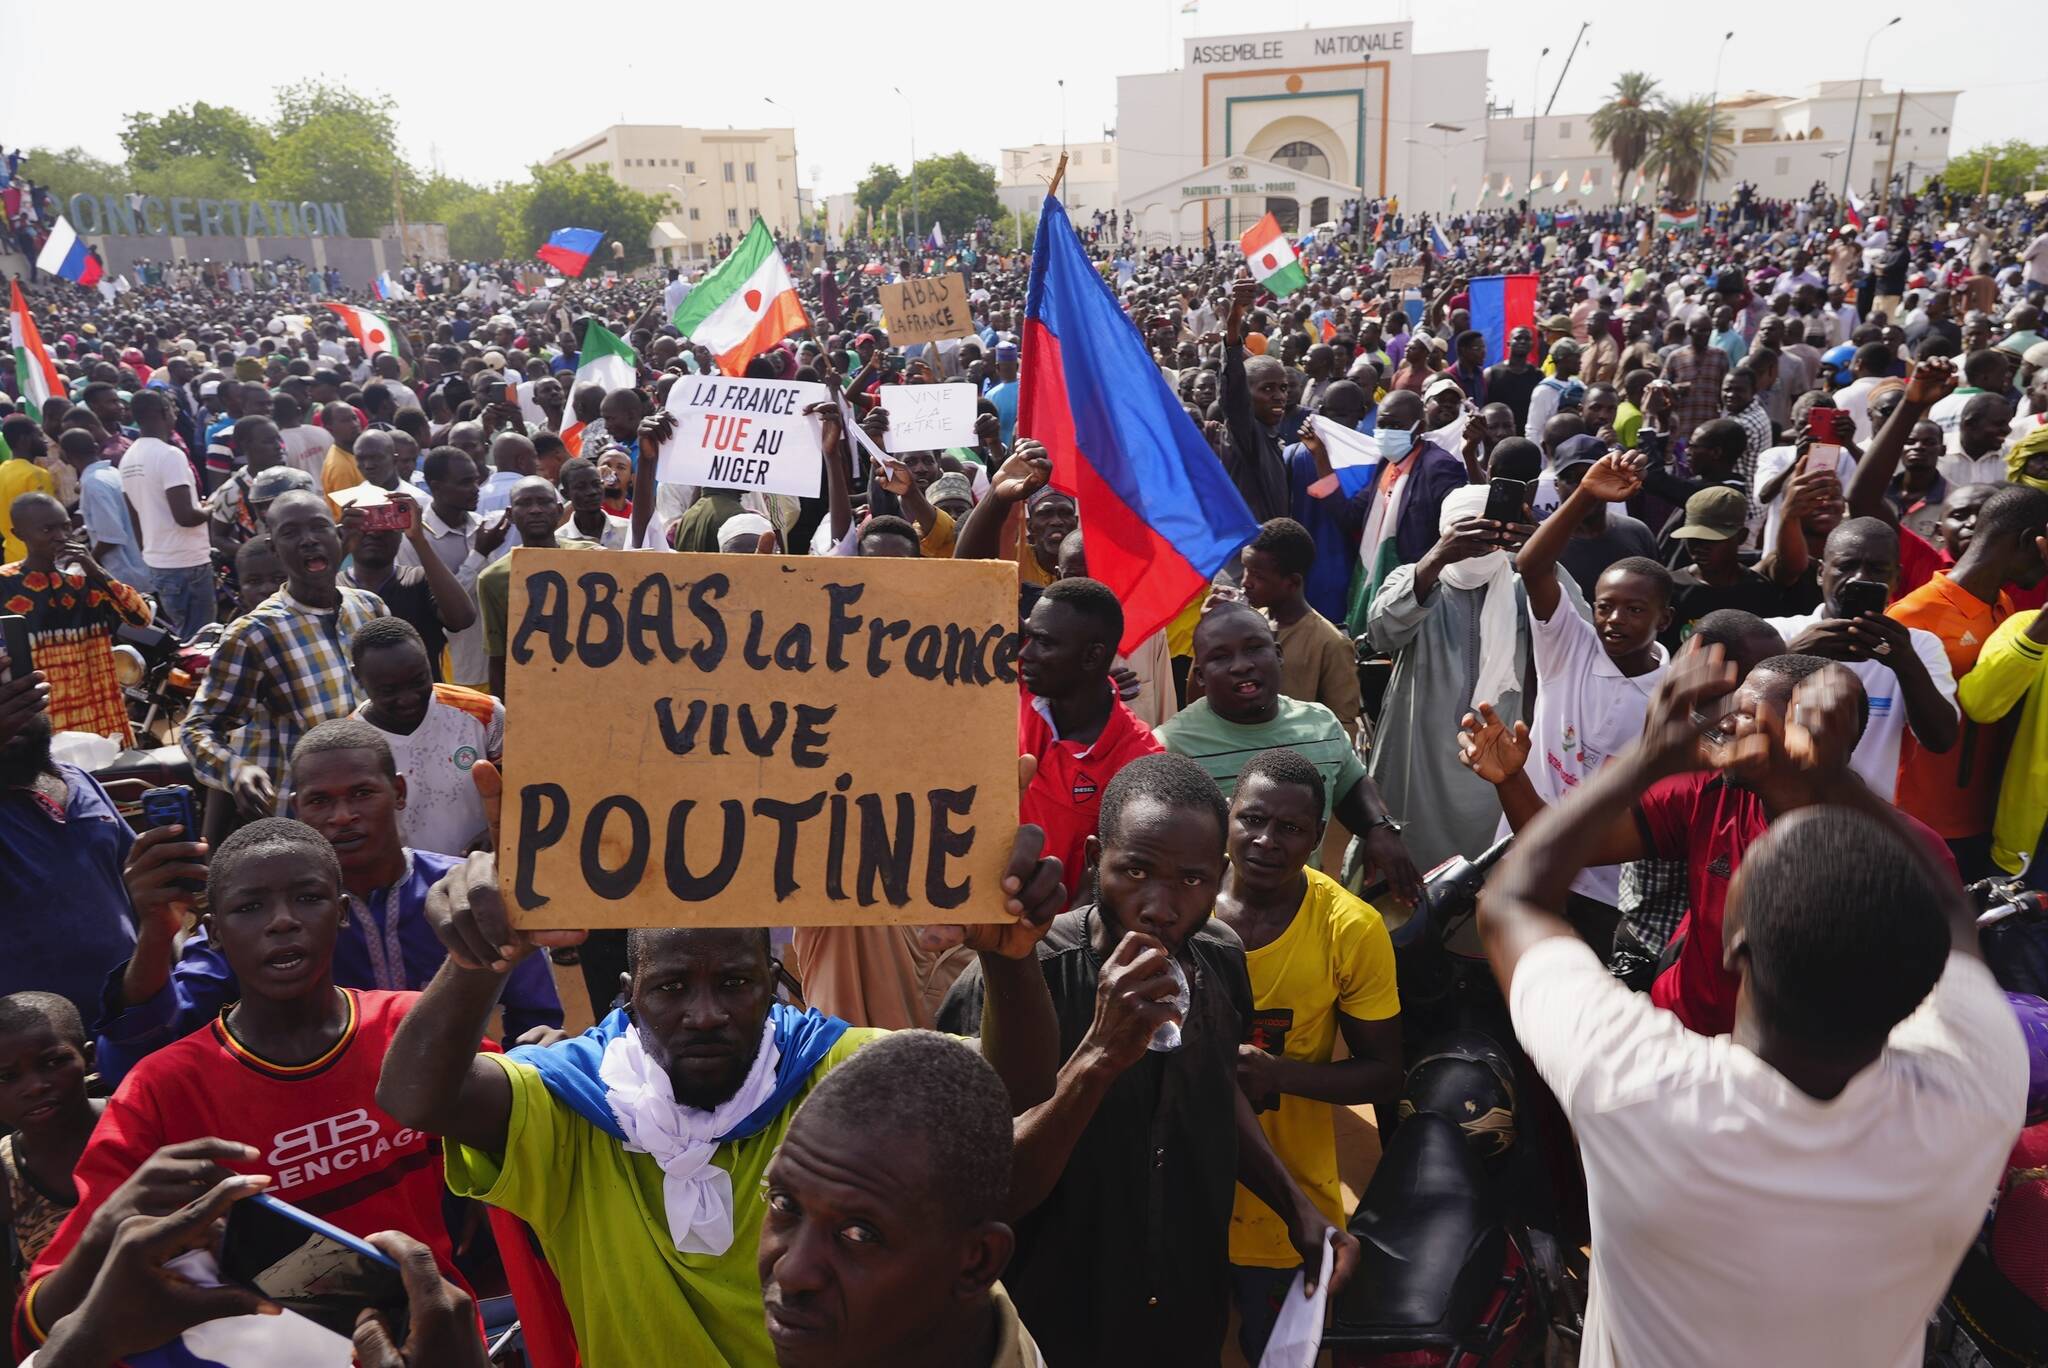 FILE - Nigeriens participate in a march called by supporters of coup leader Gen. Abdourahmane Tchiani in Niamey, Niger, Sunday, July 30, 2023. The French Foreign Ministry says Tuesday, Aug.1, 2023 France is planning an imminent evacuation of people seeking to leave Niger after the coup last week in the former French colony. Poster reads: Down with France, long live Putin.” (AP Photo/Sam Mednick, File)